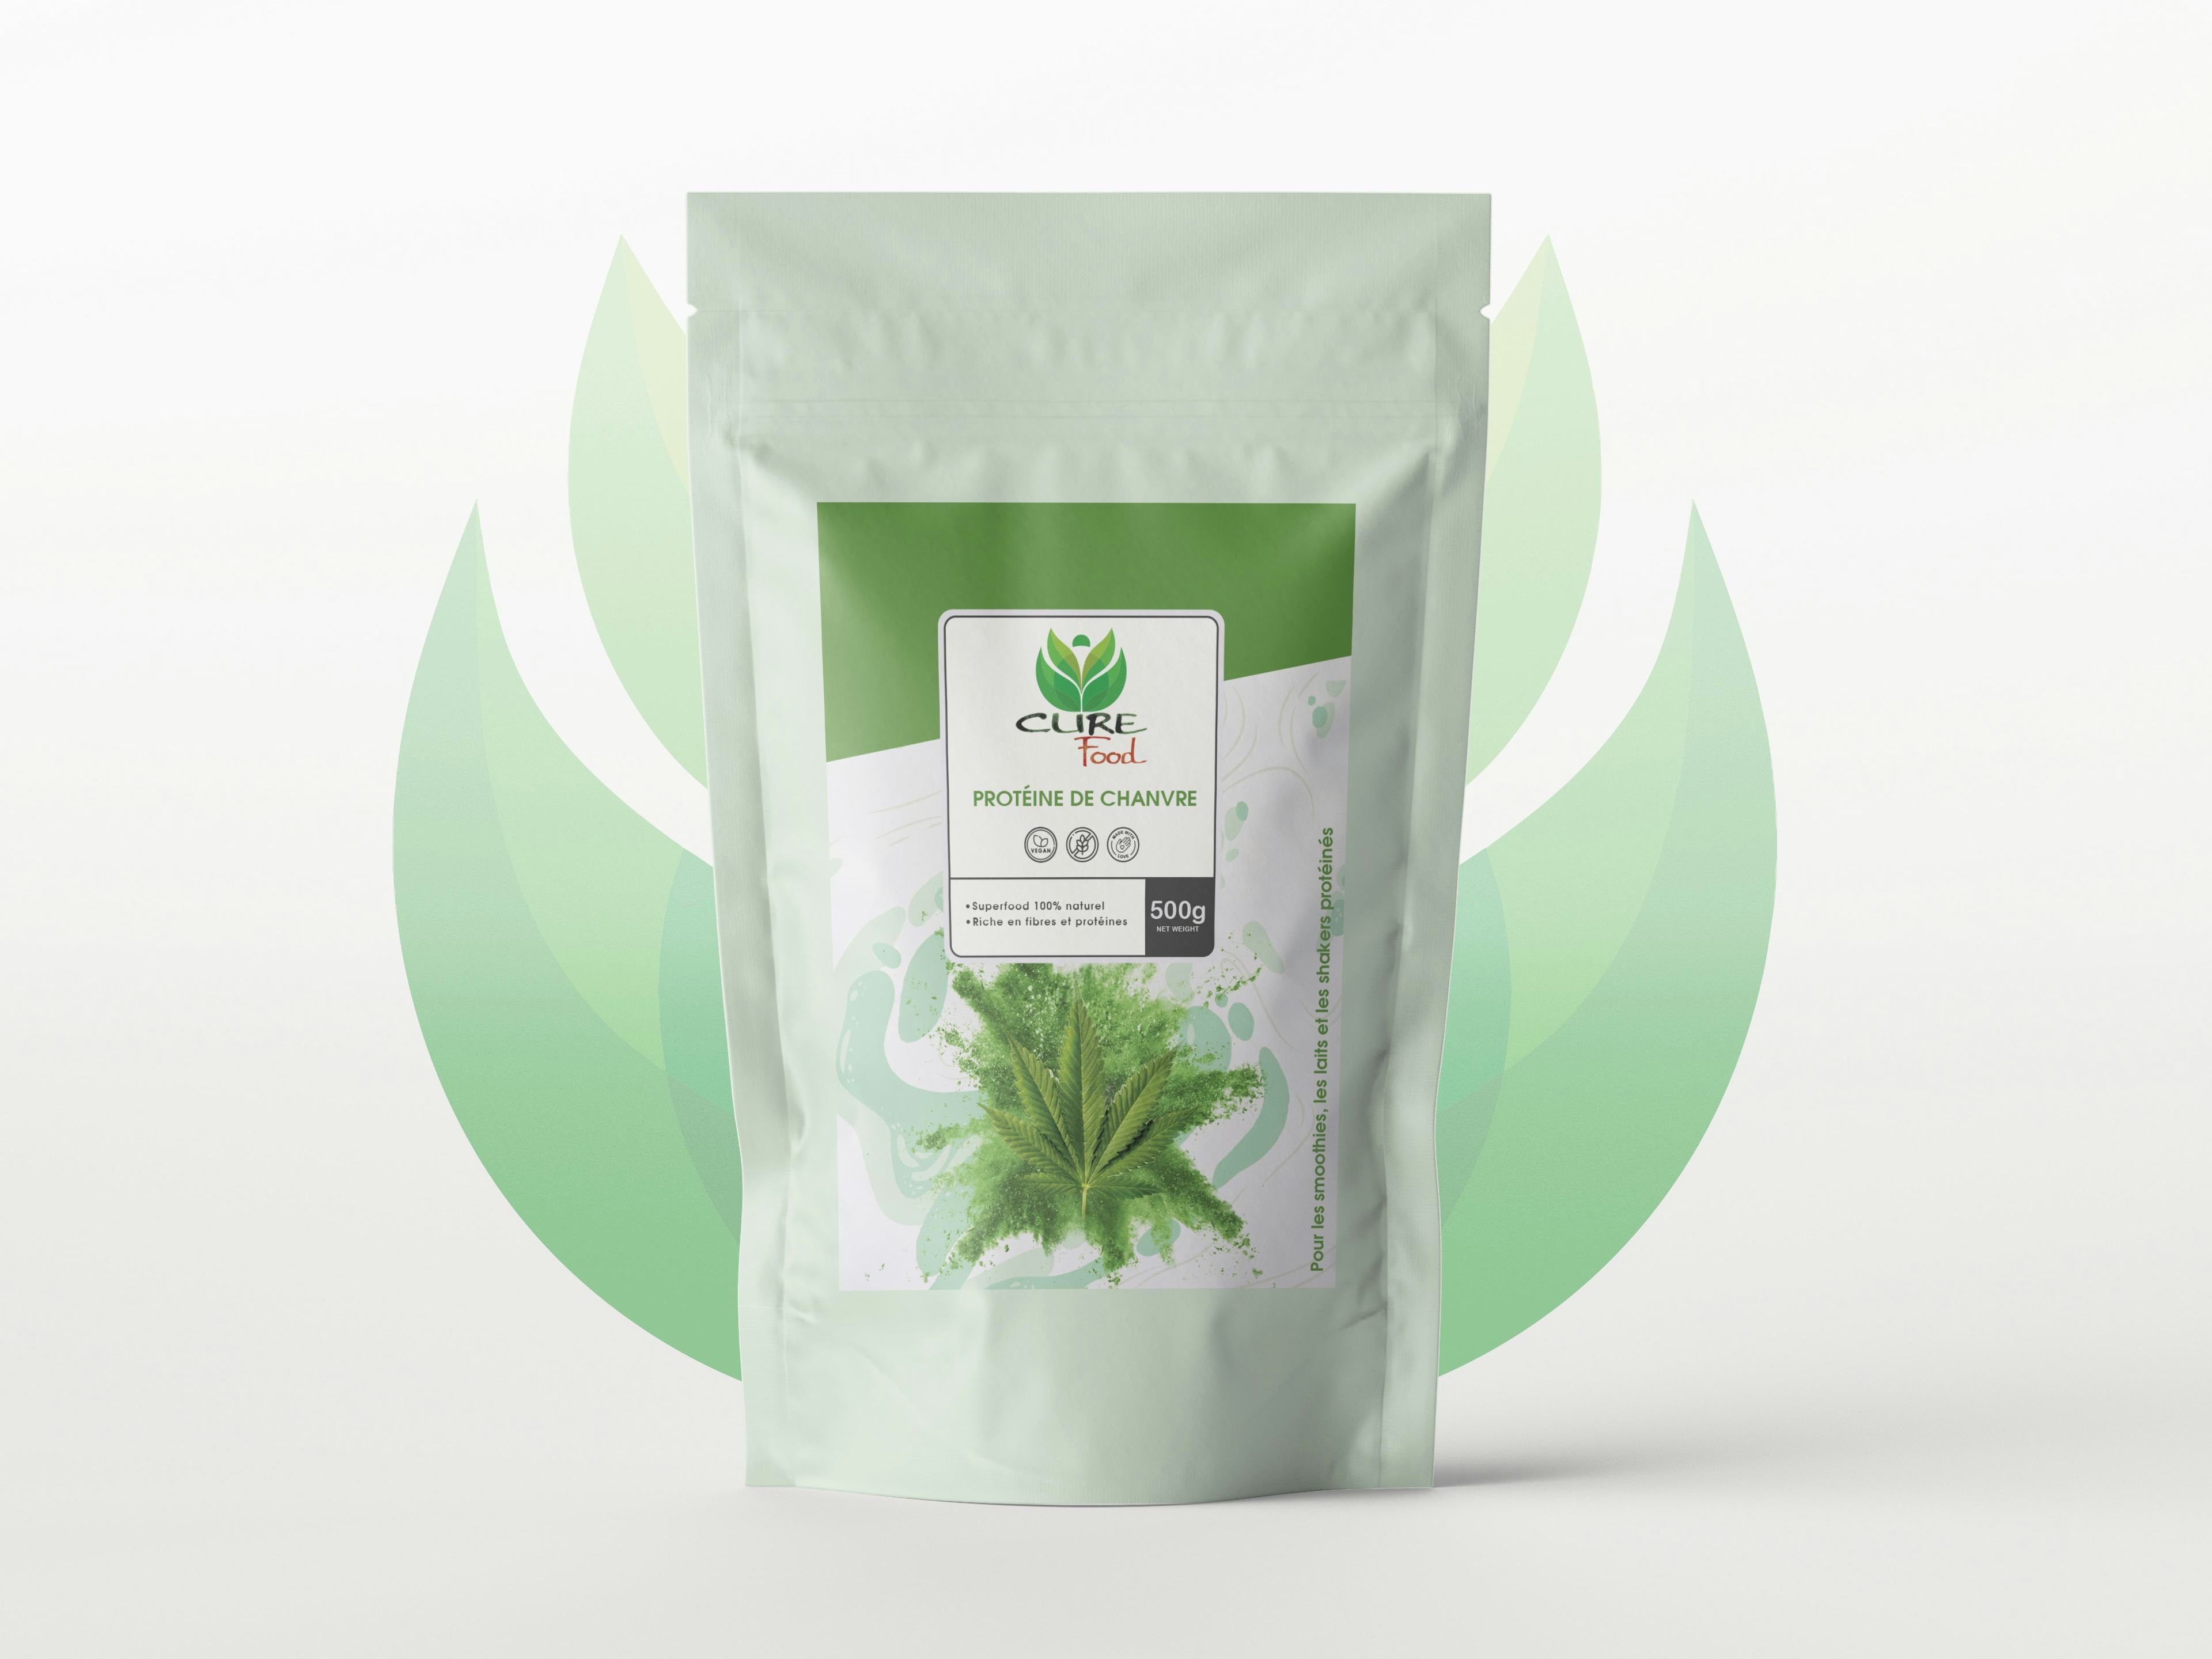 Hemp Protein, artisanal product for direct sale in Switzerland